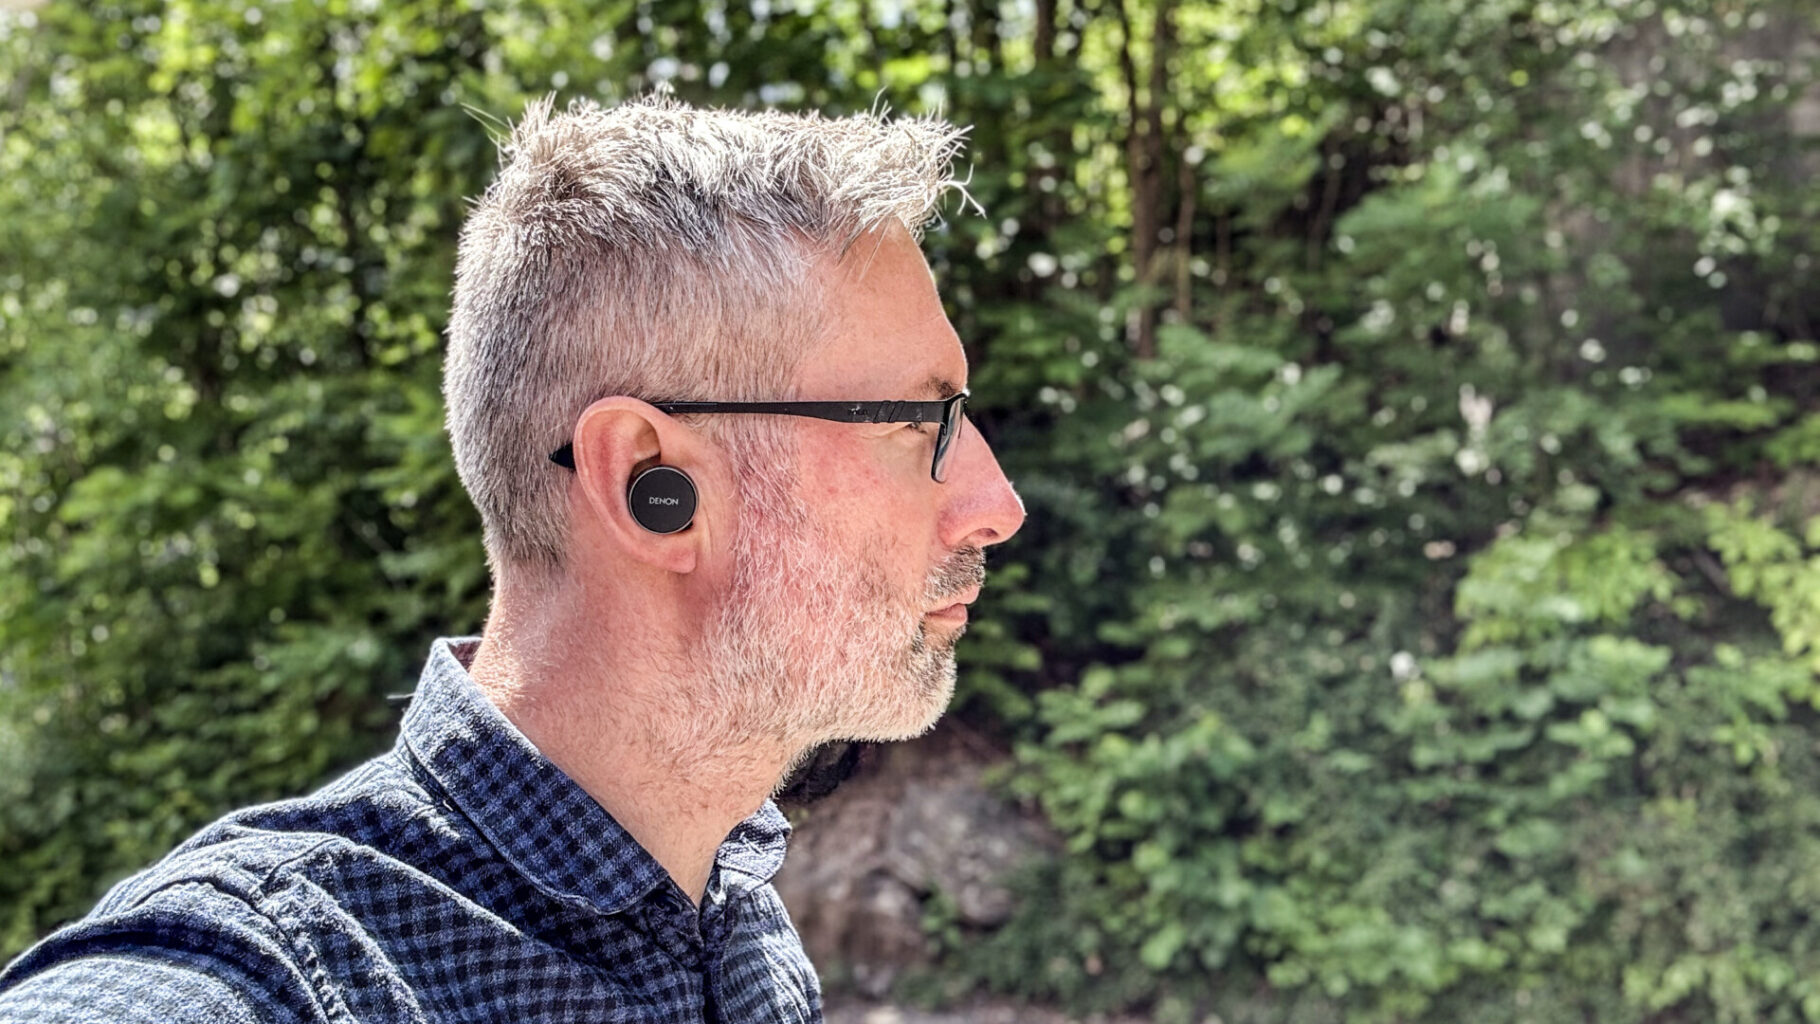 a man wearing glasses and a wireless earbuds Denon PerL Pro - GeirNordby